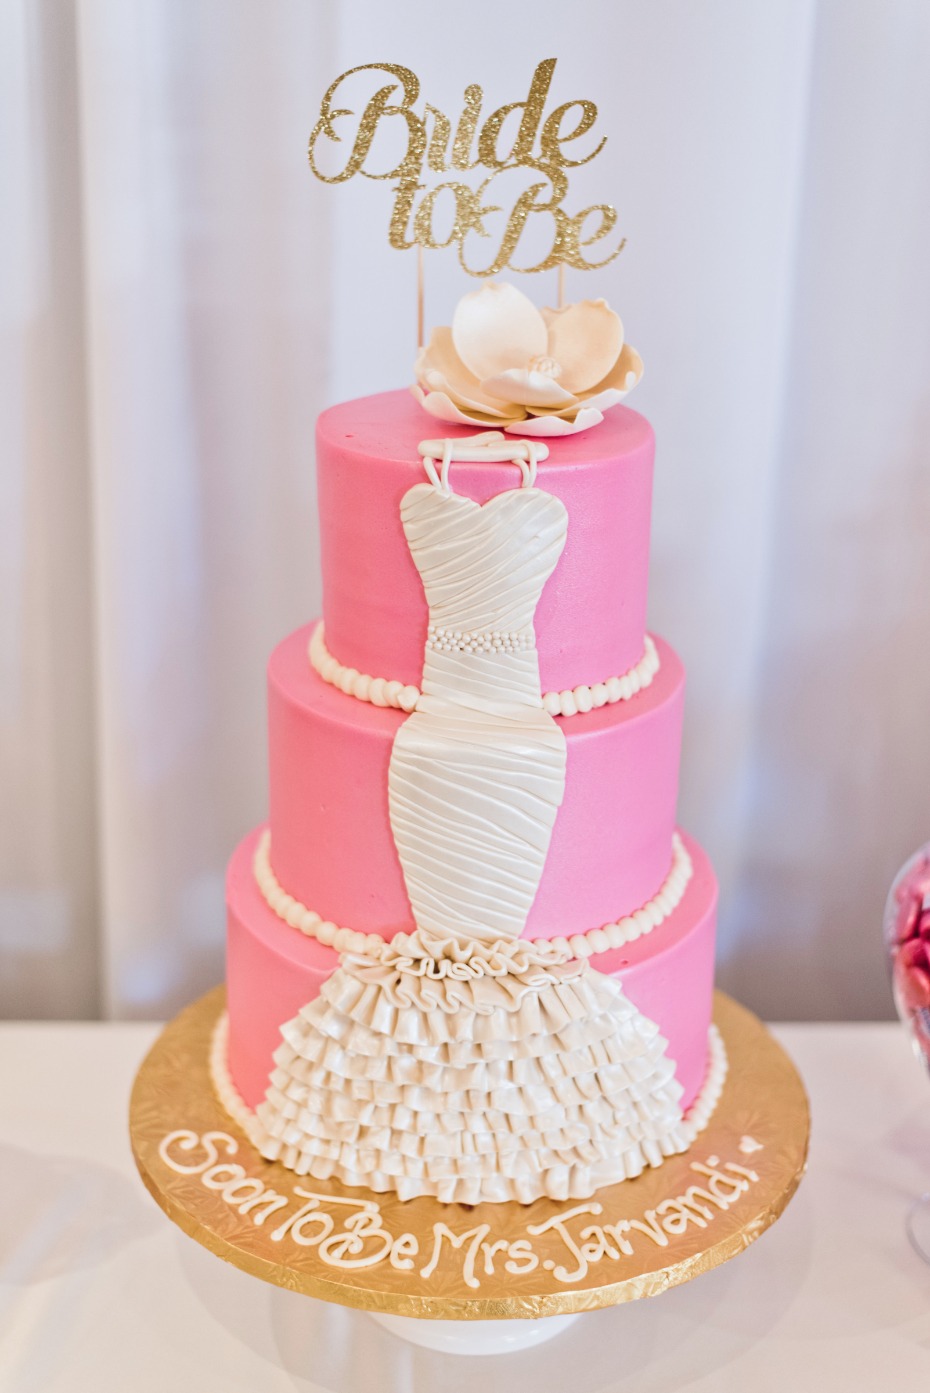 Bride to be bridal shower cake